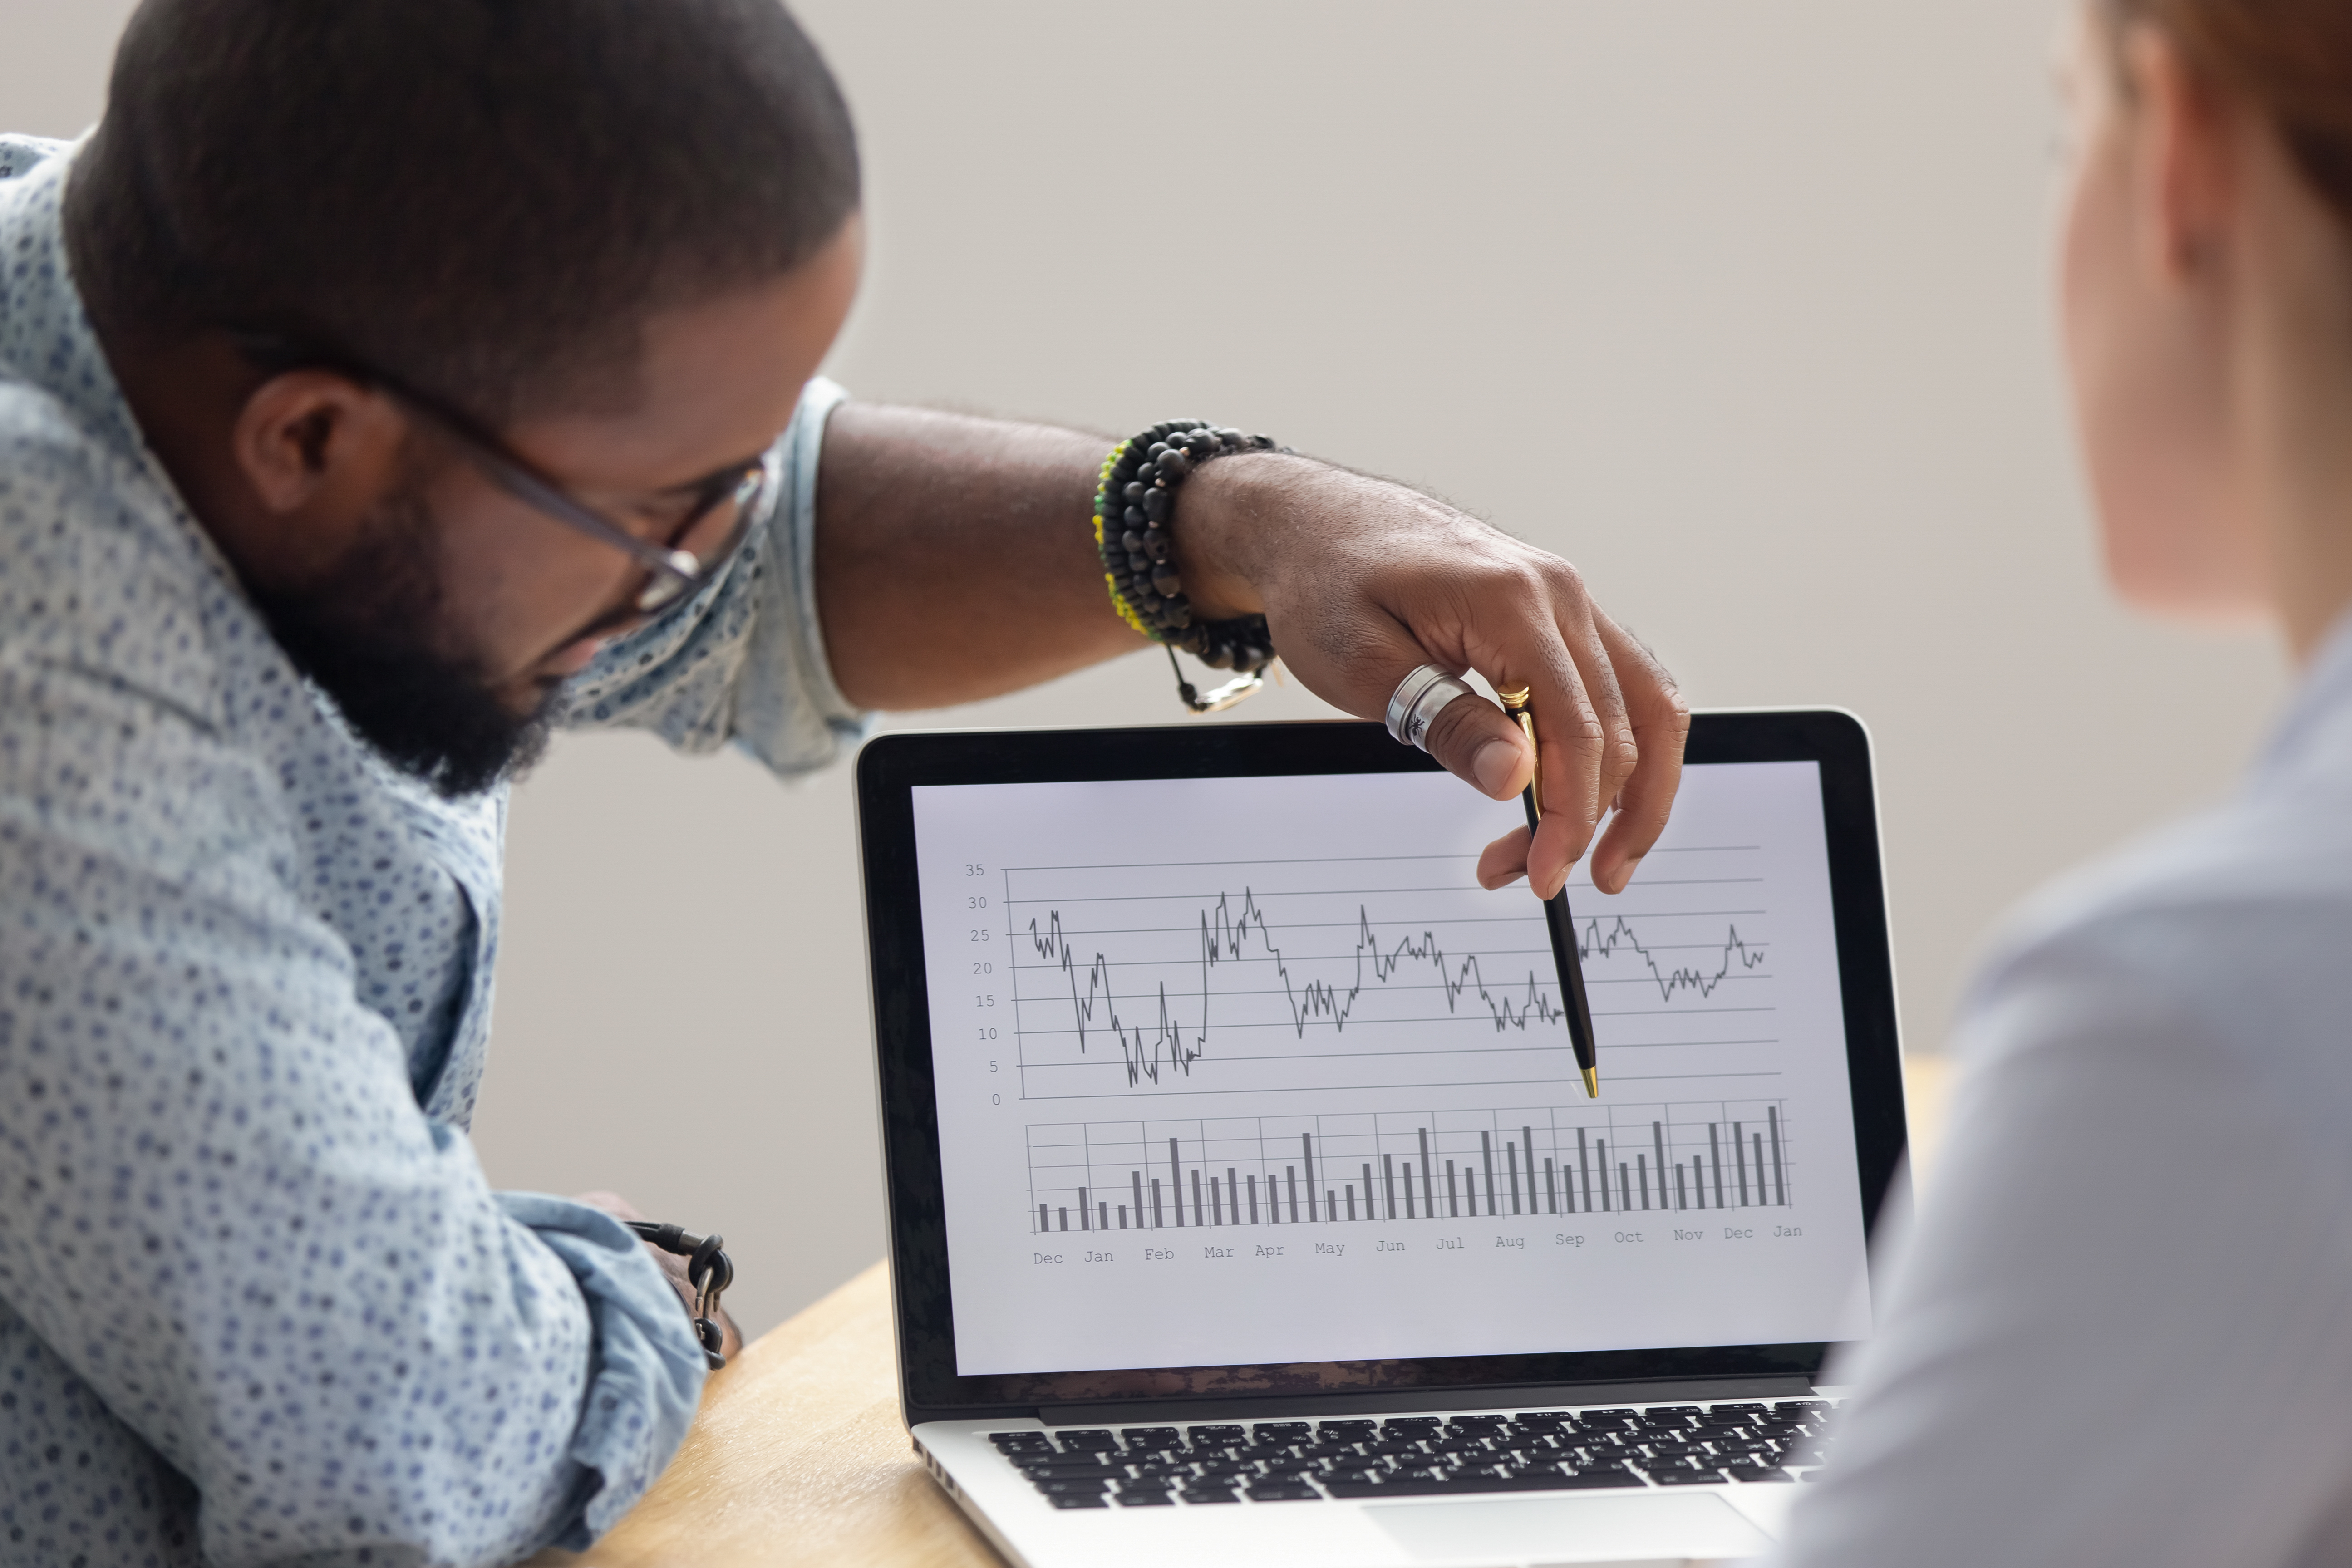 Focused african analyst showing client or colleague annual financial report analyzing business data on laptop screen using software for digital graphic statistic analysis, economic market graphs ; Shutterstock ID 1368244205; Purchase Order: N/A